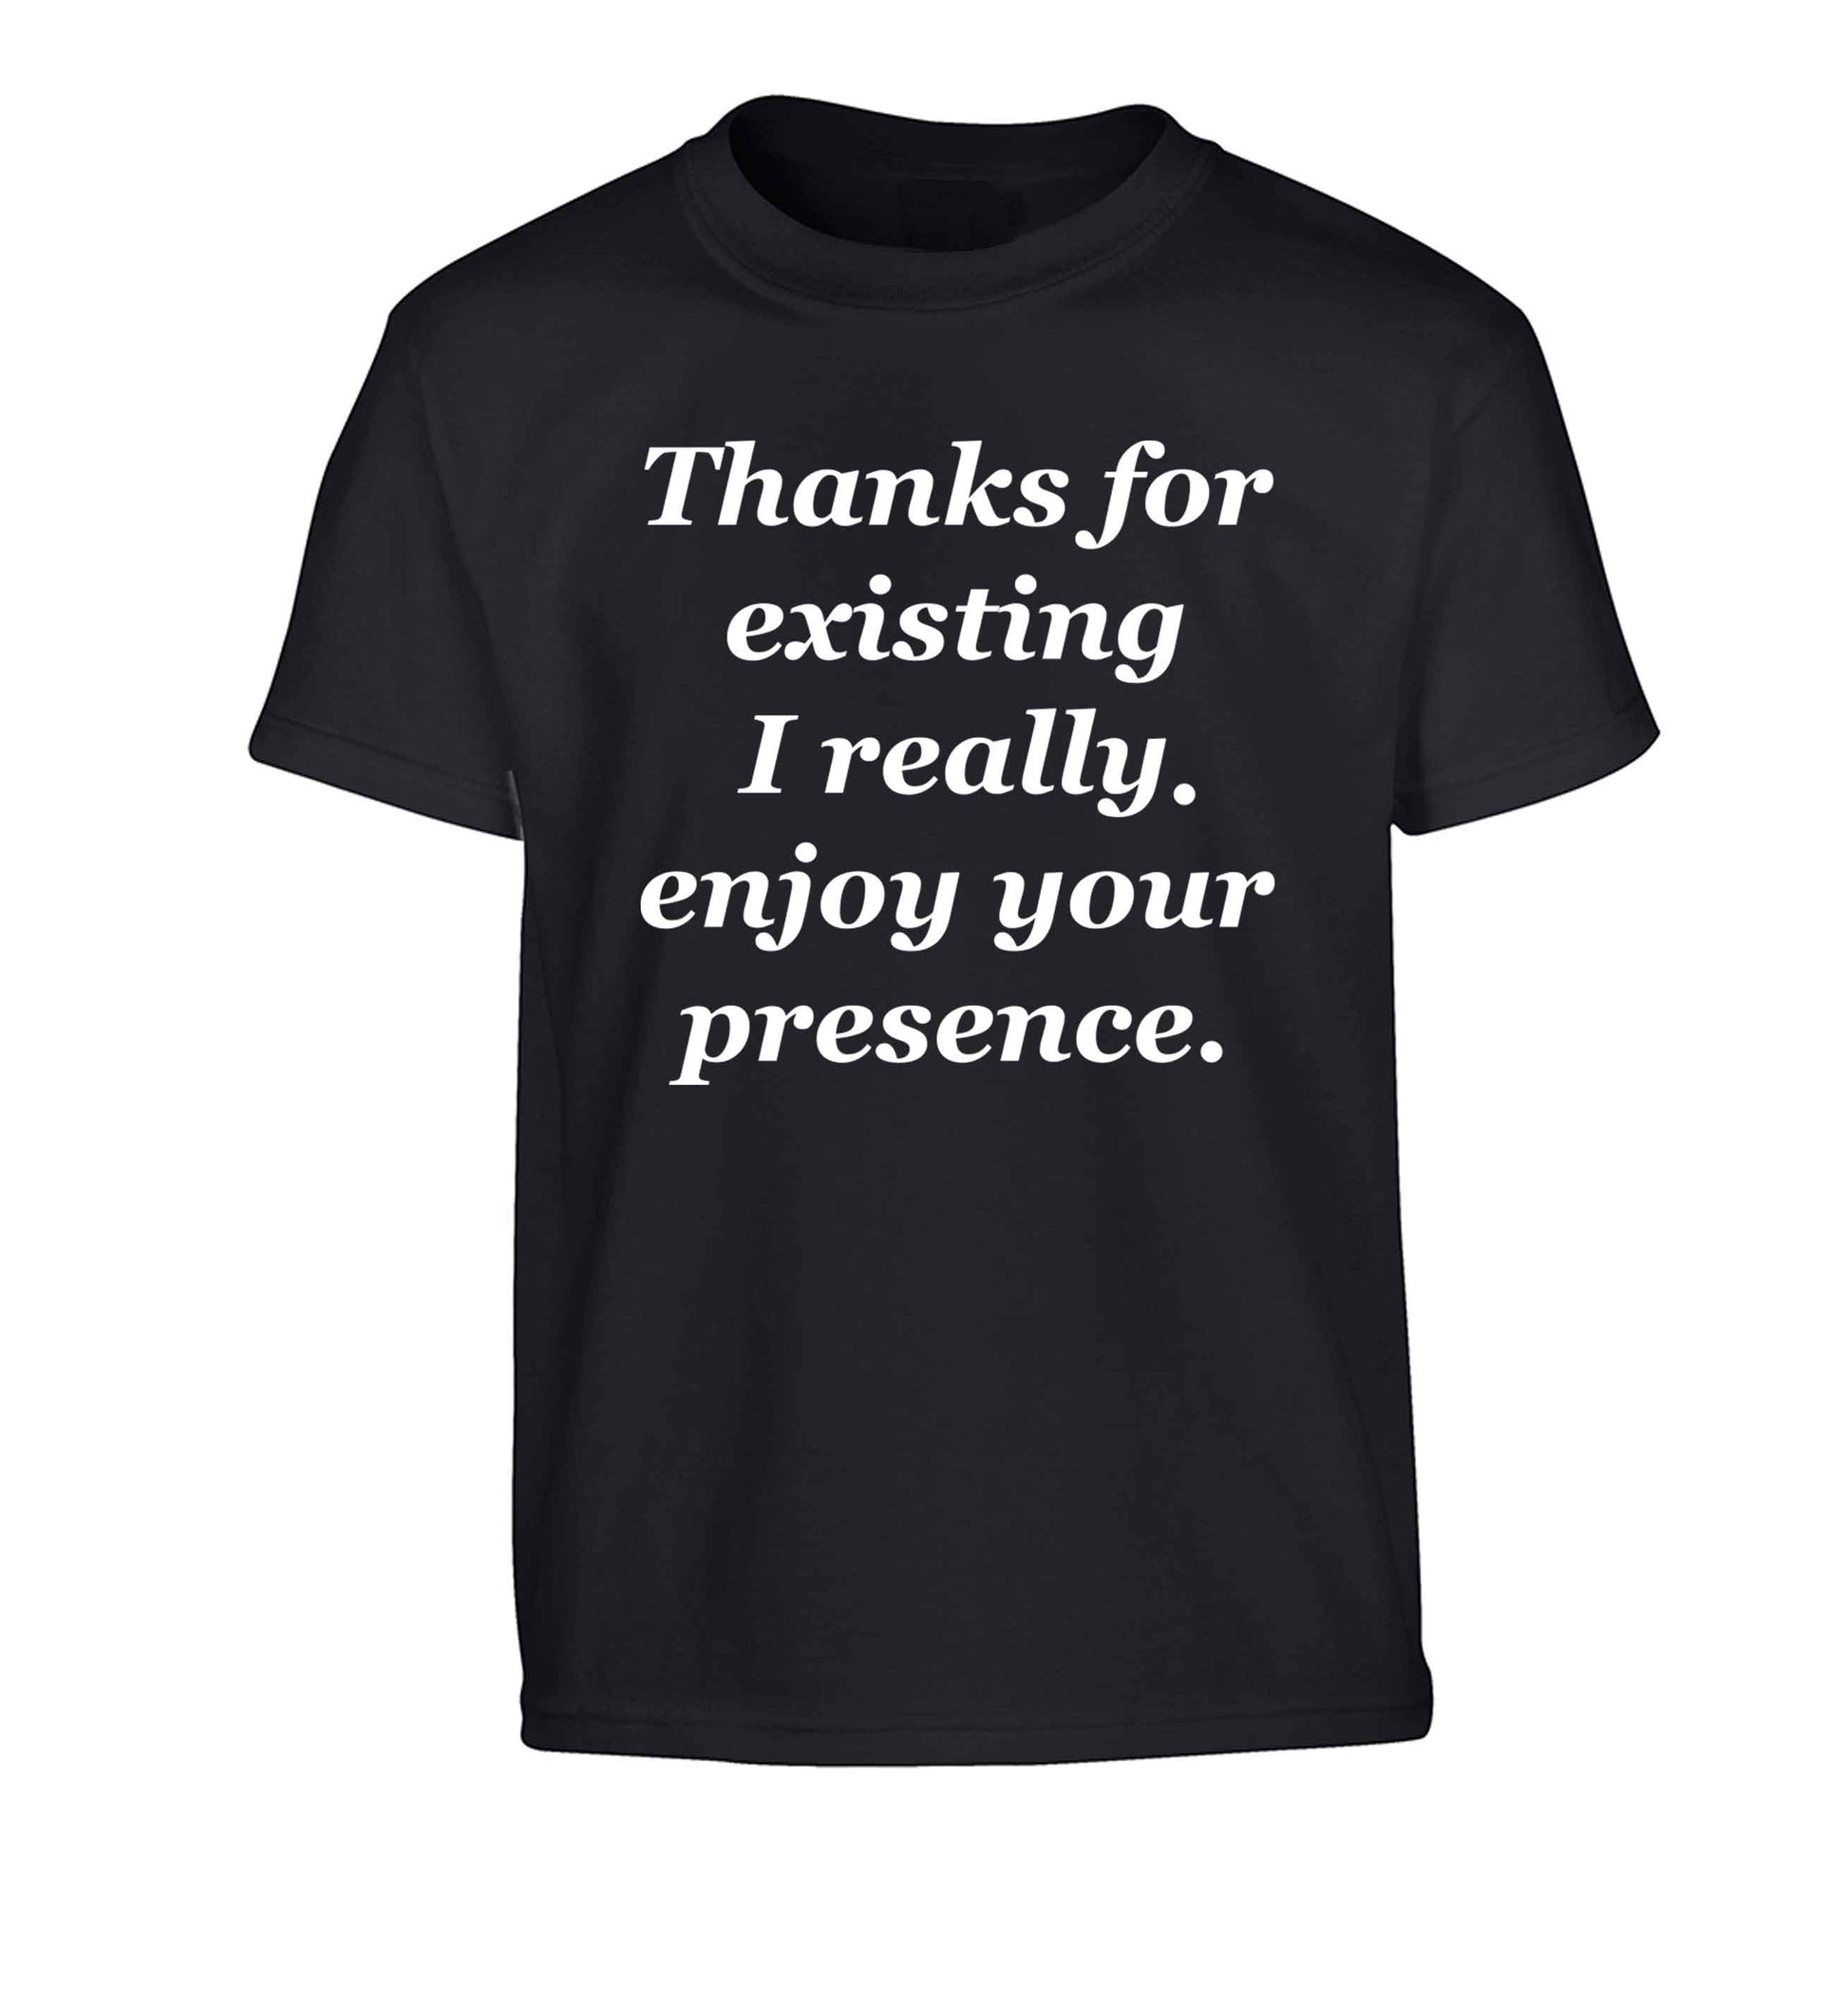 Thanks for existing I really enjoy your presence Children's black Tshirt 12-13 Years